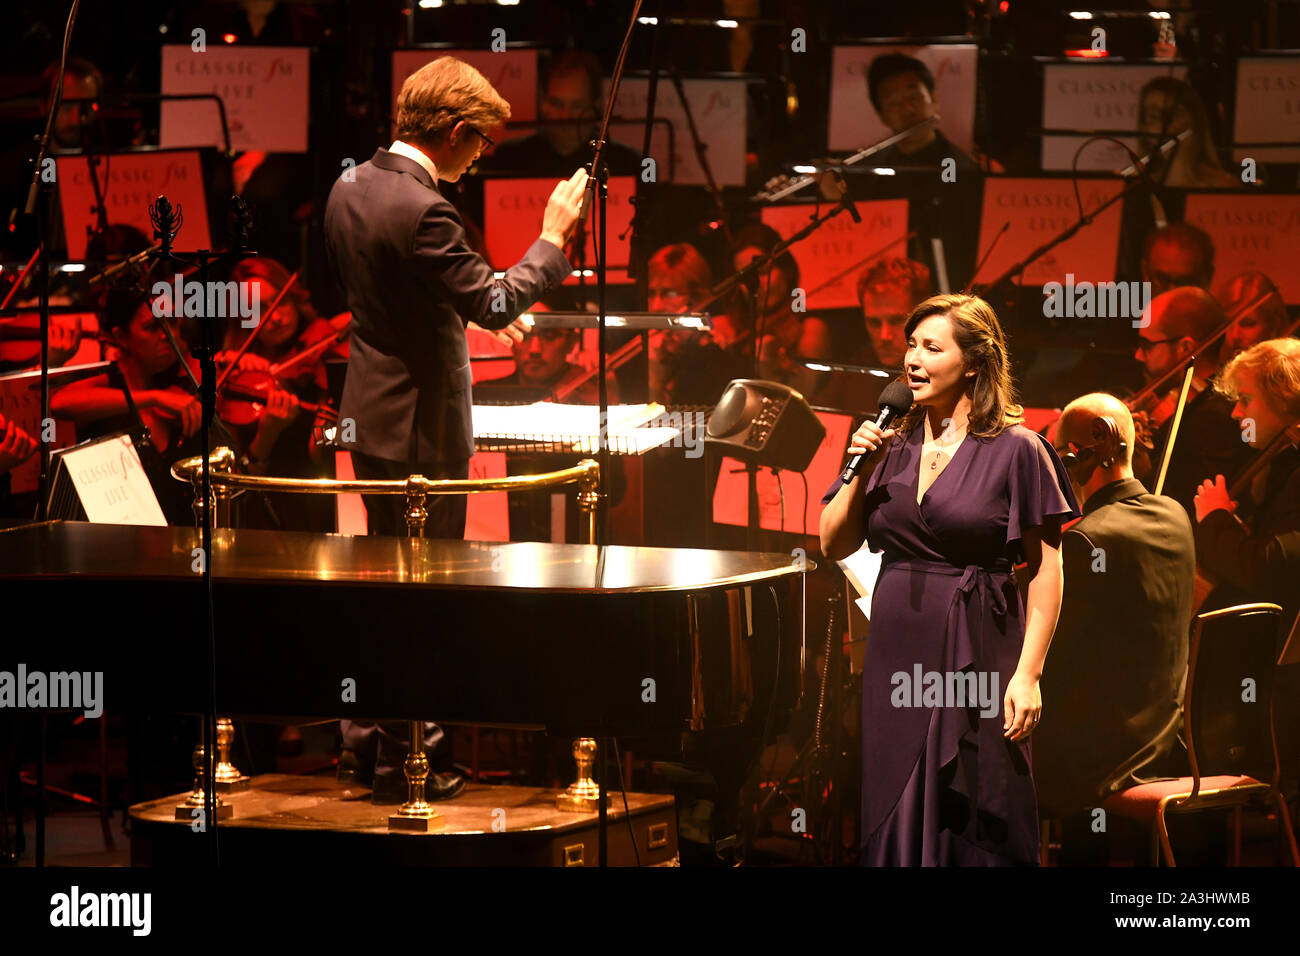 Sara Brimer Davey performs as Gareth Malone conducts the Bournemouth Symphony Orchestra at Classic FM Live at London's Royal Albert Hall. Stock Photo